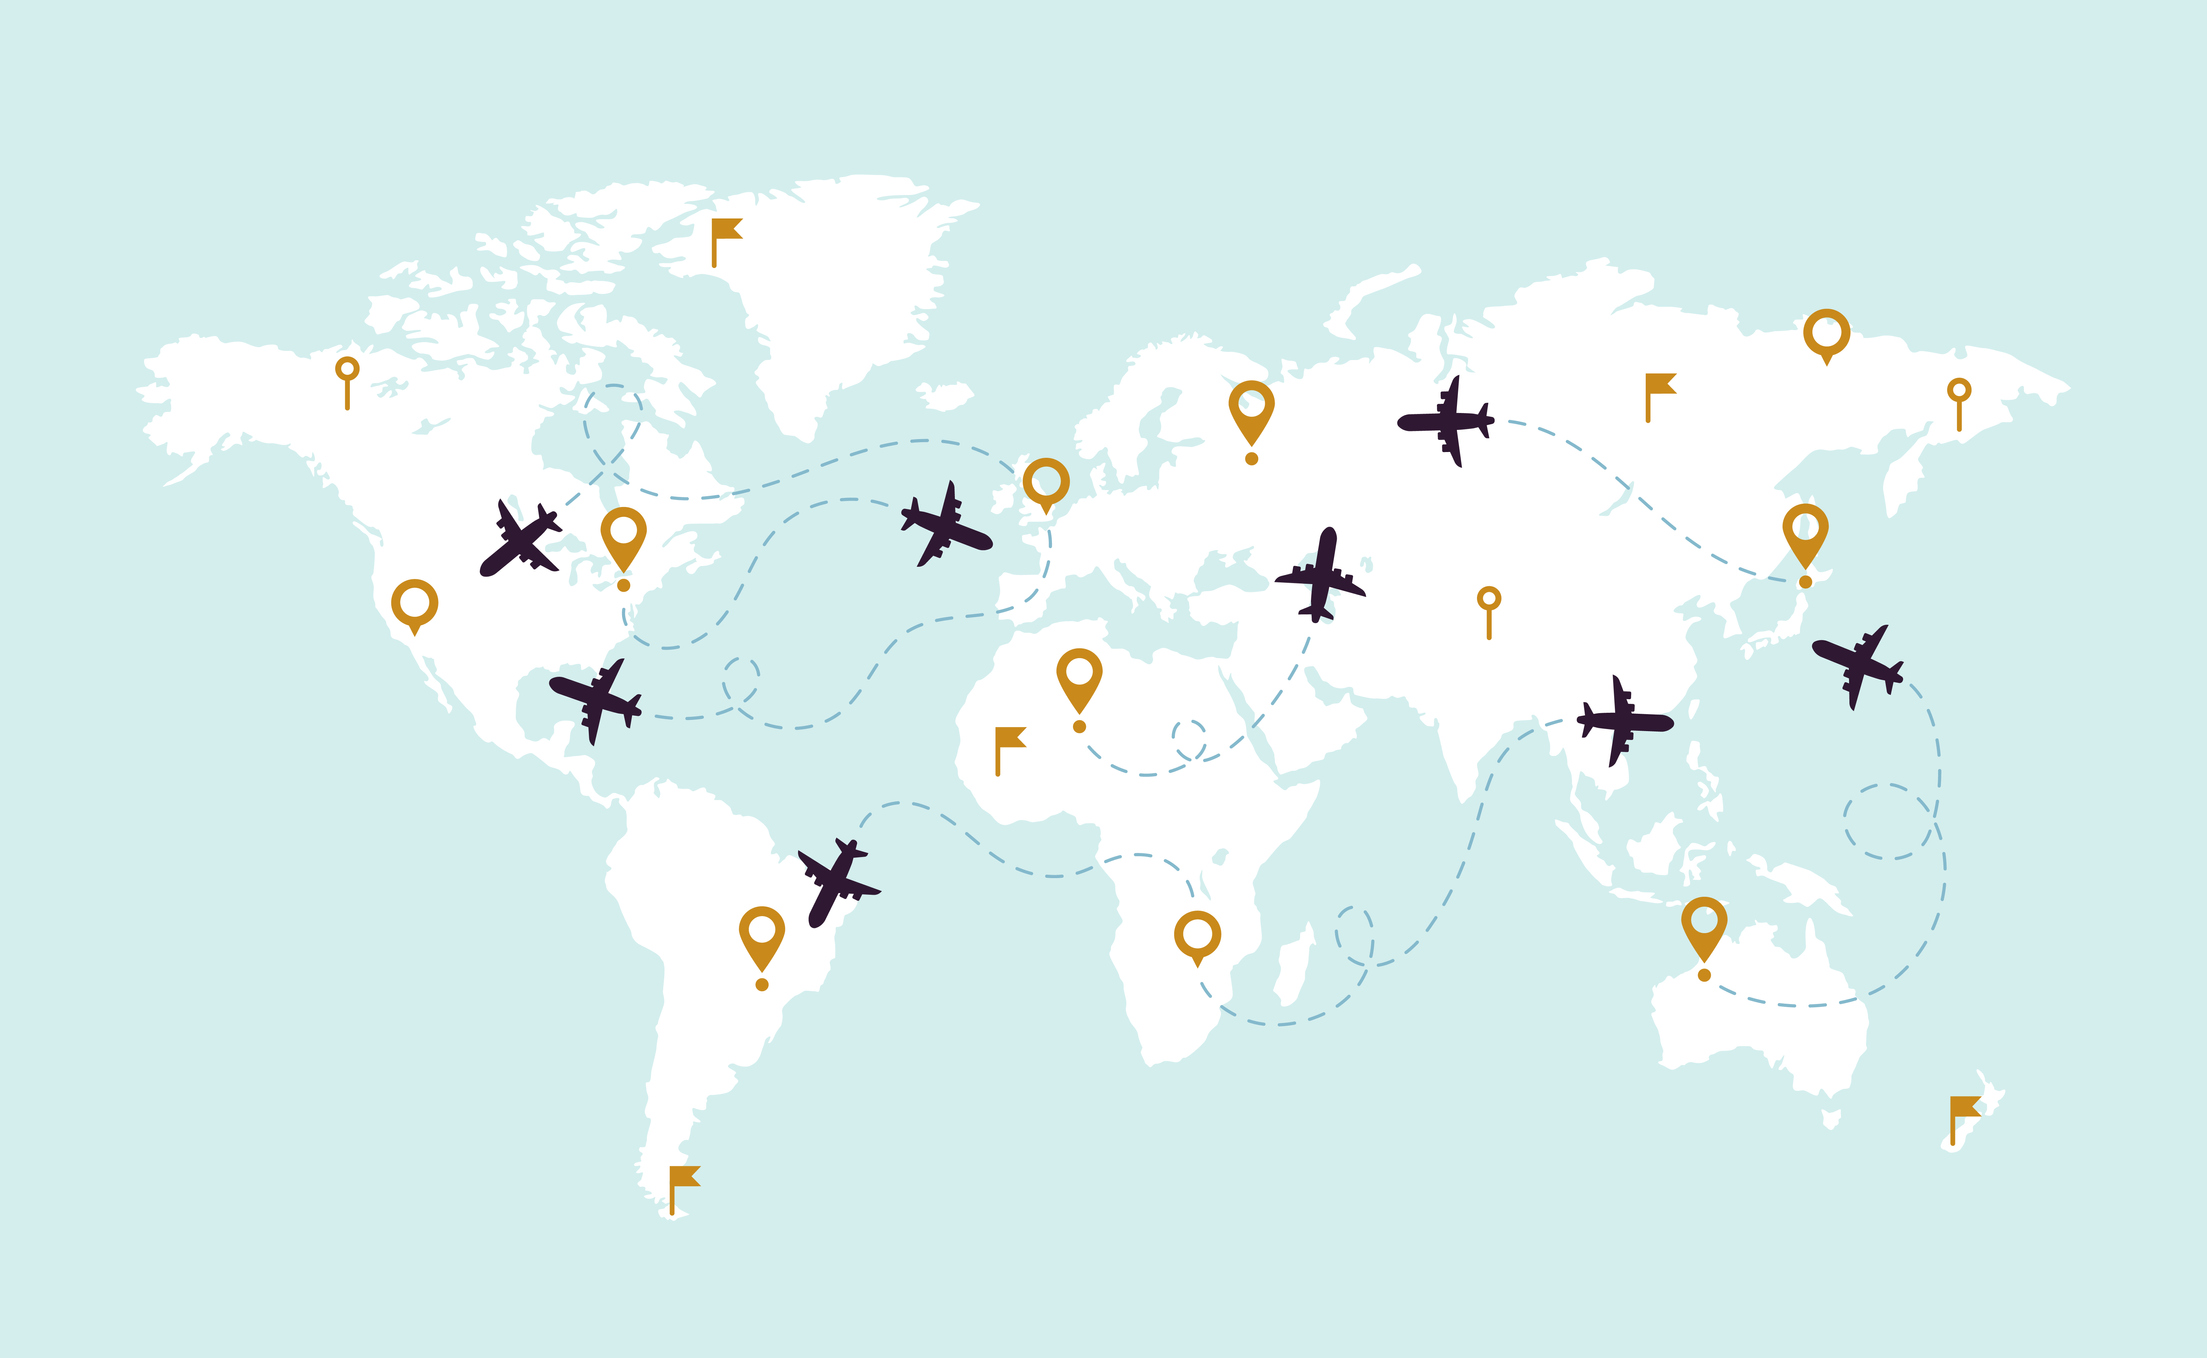 World map plane tracks. Aviation track path on world map, airplane route line and travel routes vector illustration